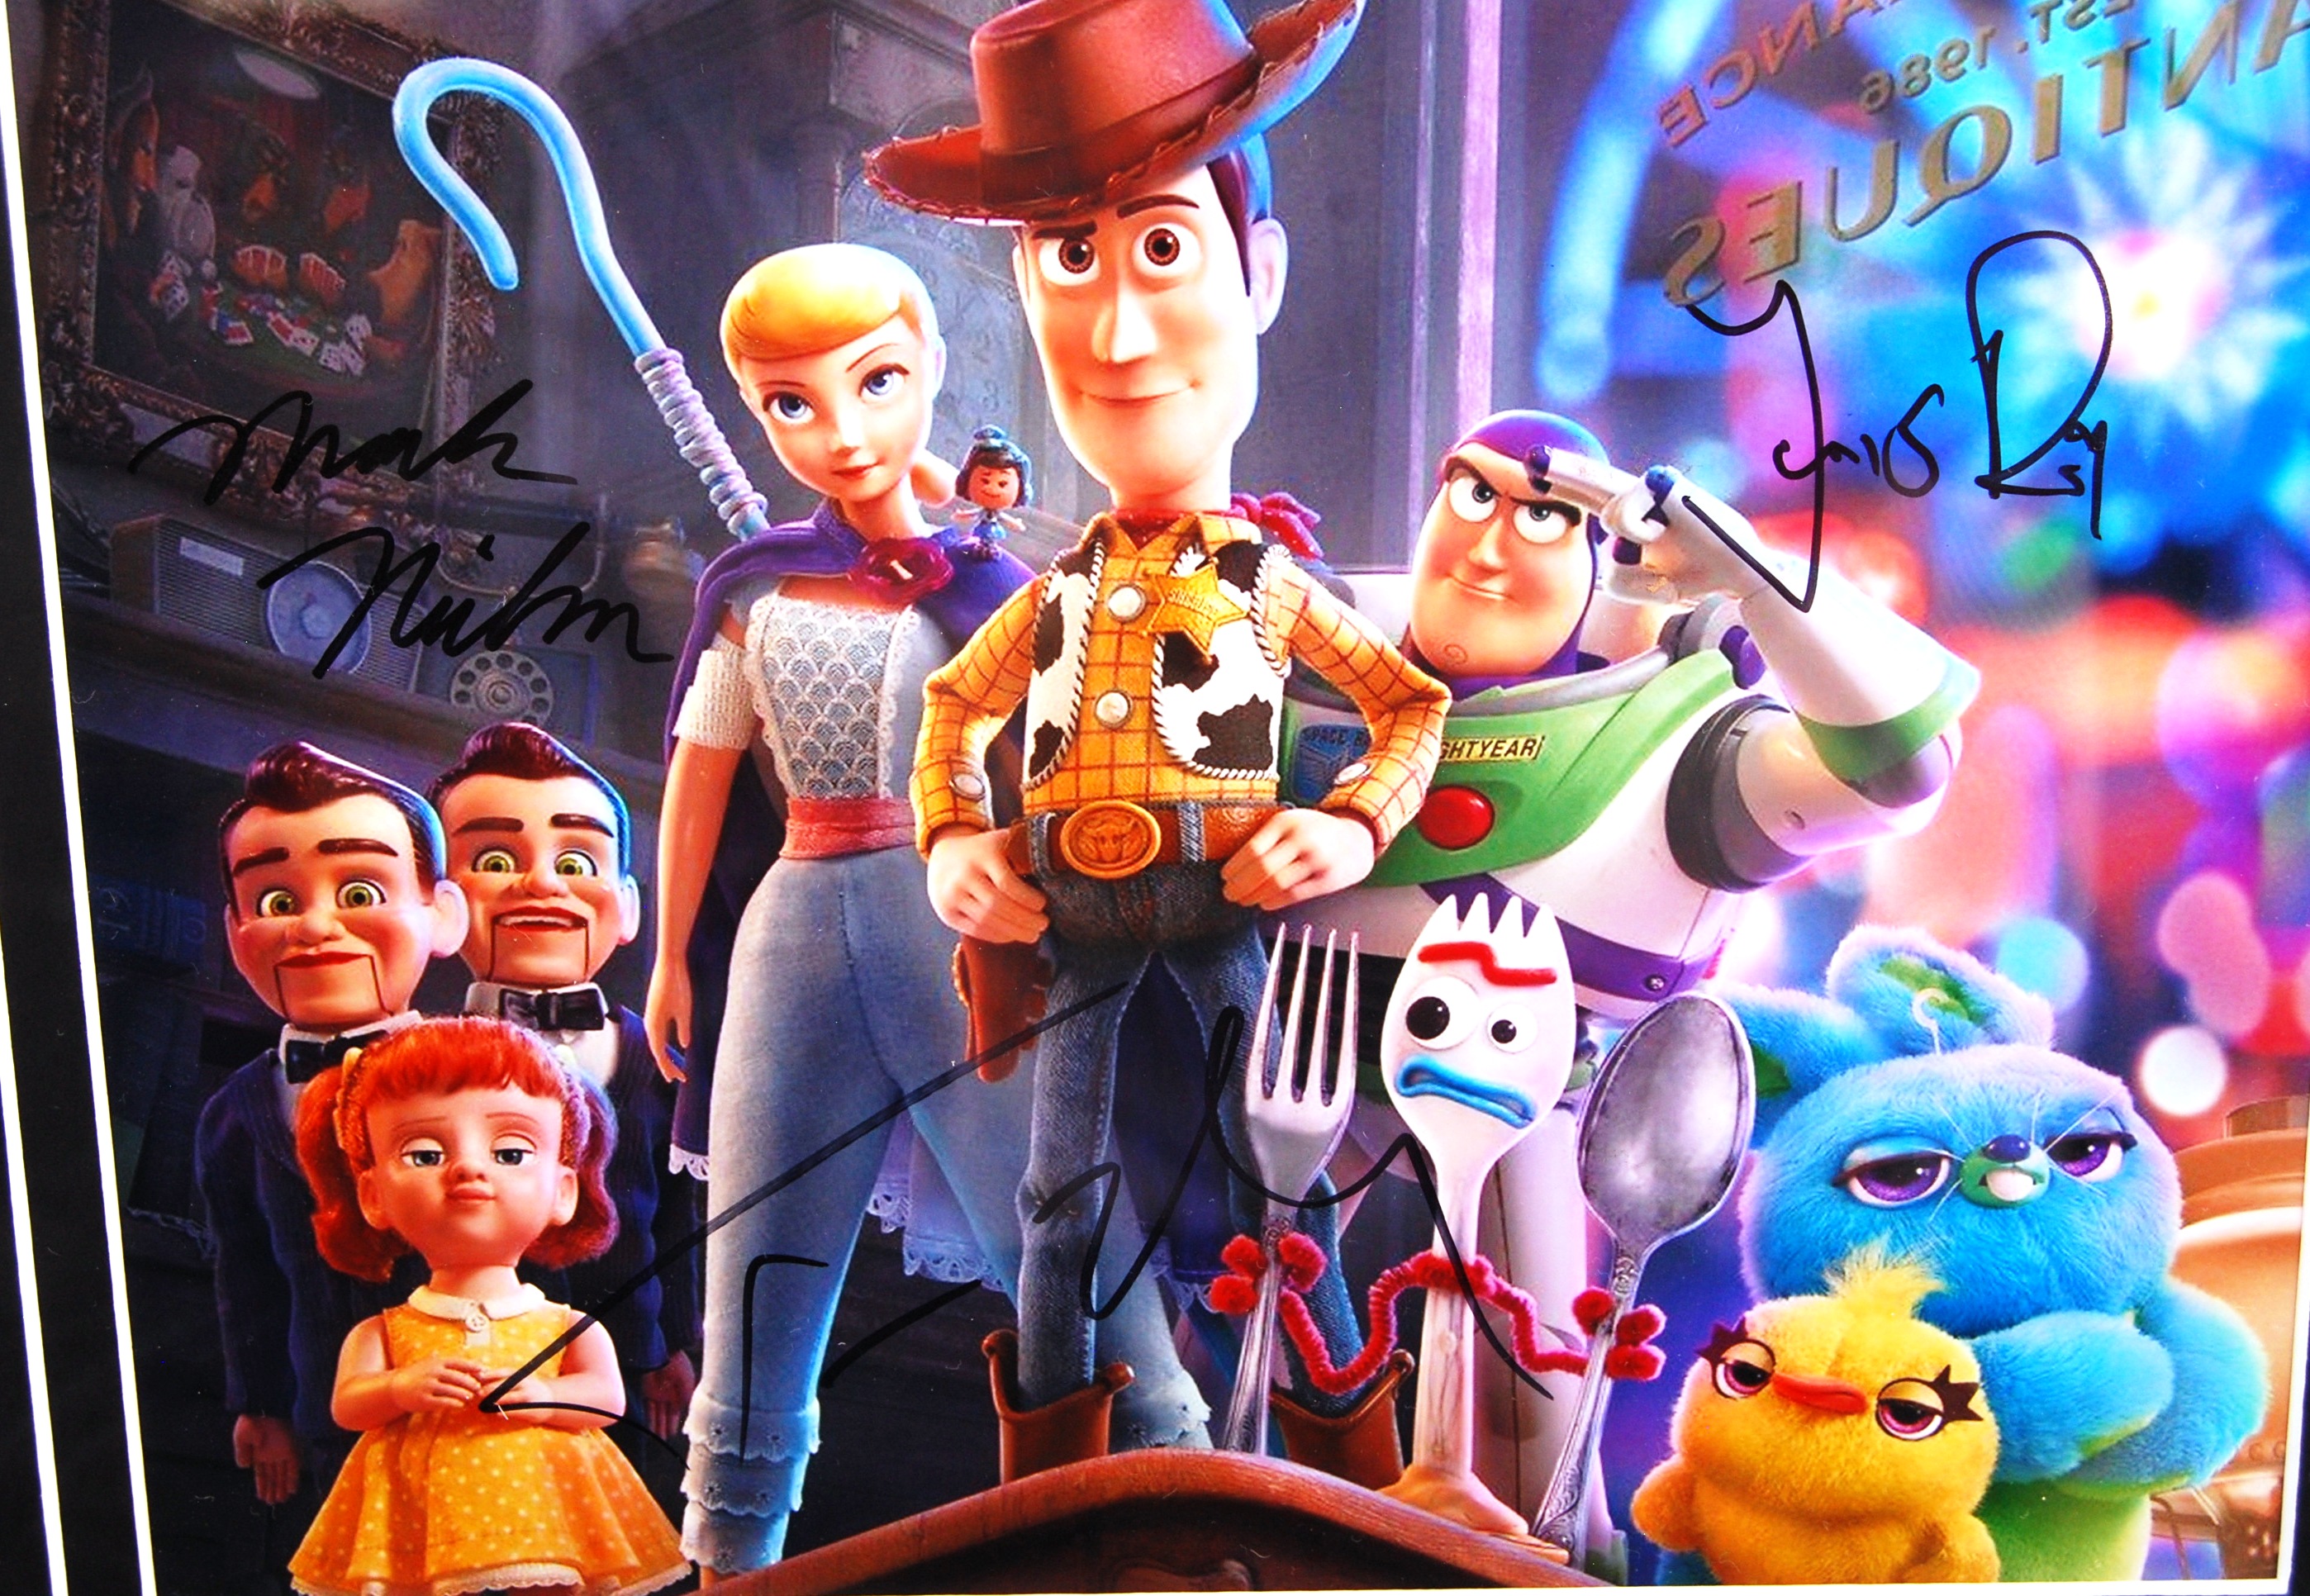 TOY STORY 4 TOM HANKS & CREW SIGNED POSTER FROM UK PREMIERE - Image 2 of 3